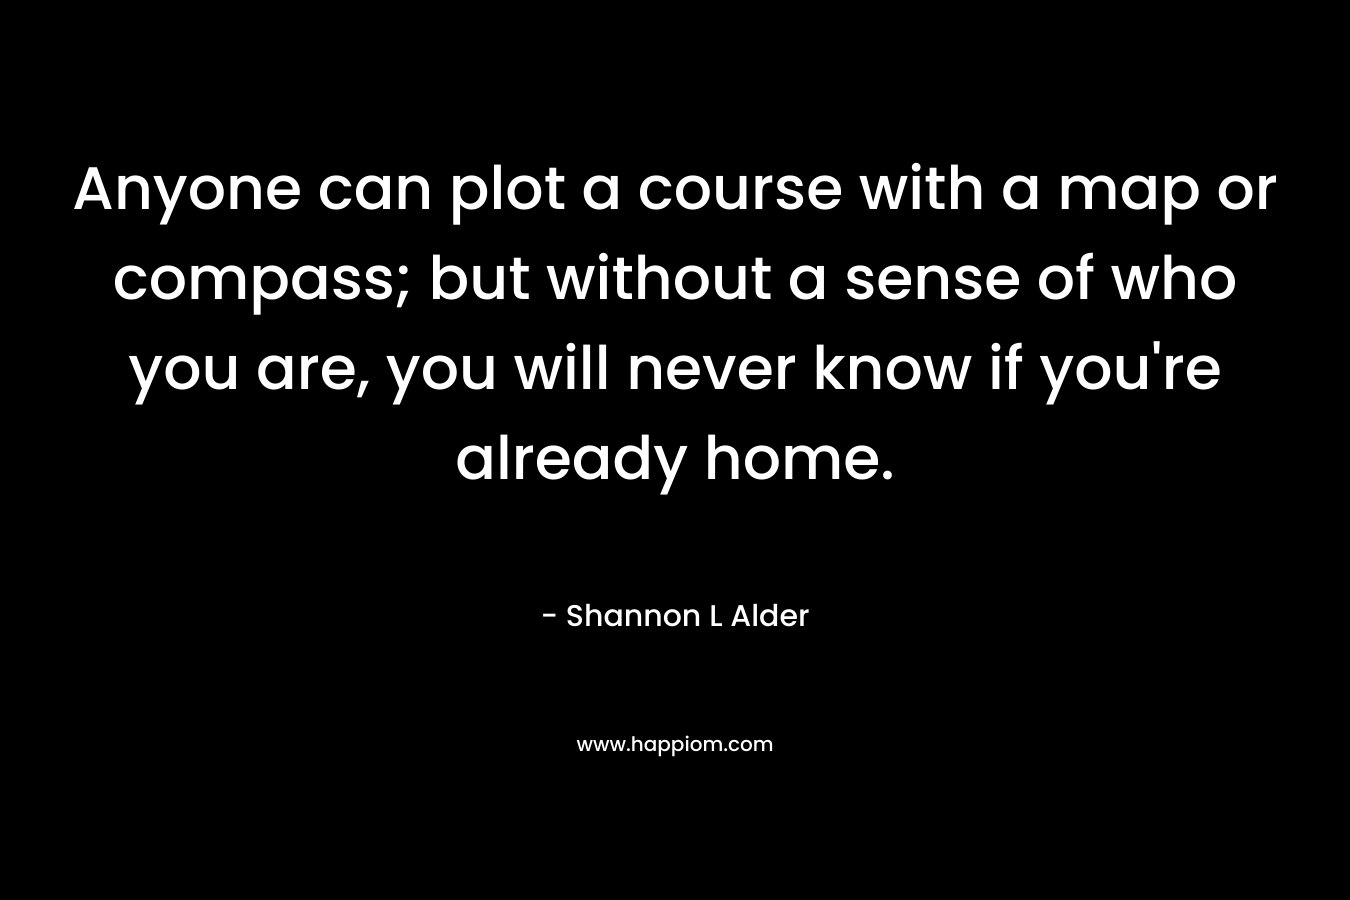 Anyone can plot a course with a map or compass; but without a sense of who you are, you will never know if you're already home.